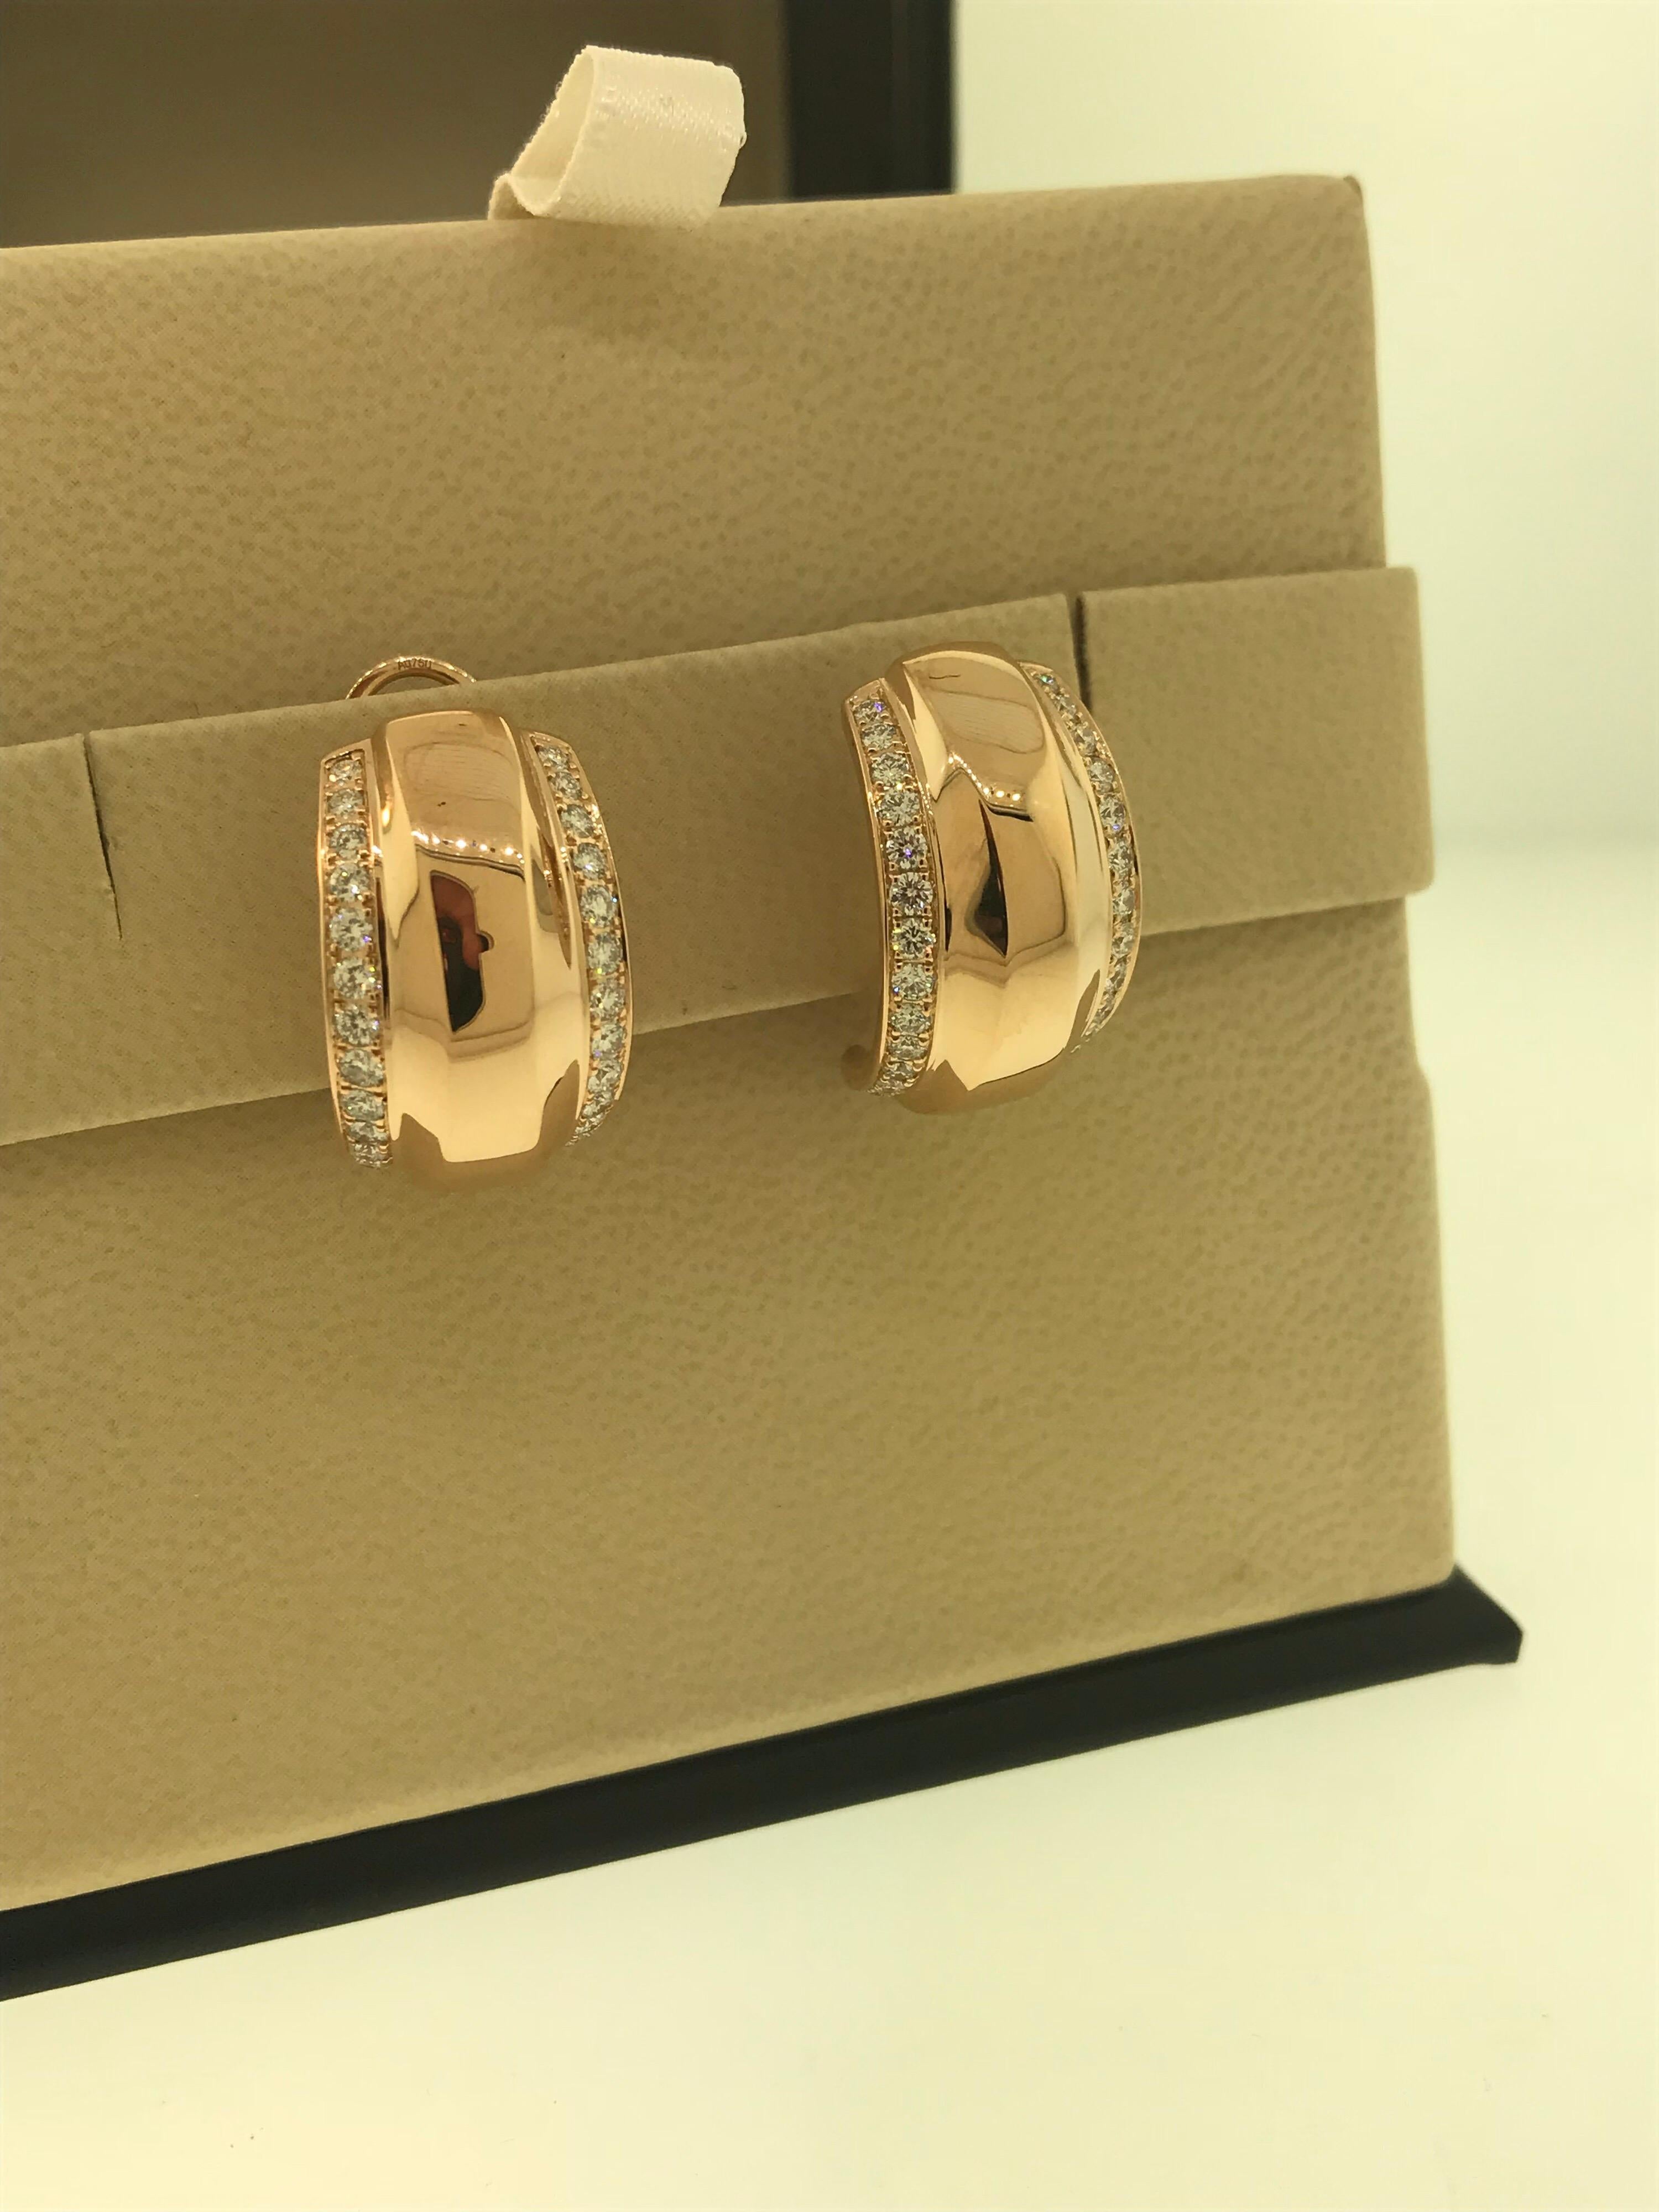 Chopard La Strada 18 Karat Rose Gold and Diamond Earrings 84/9402-5001 In New Condition For Sale In New York, NY